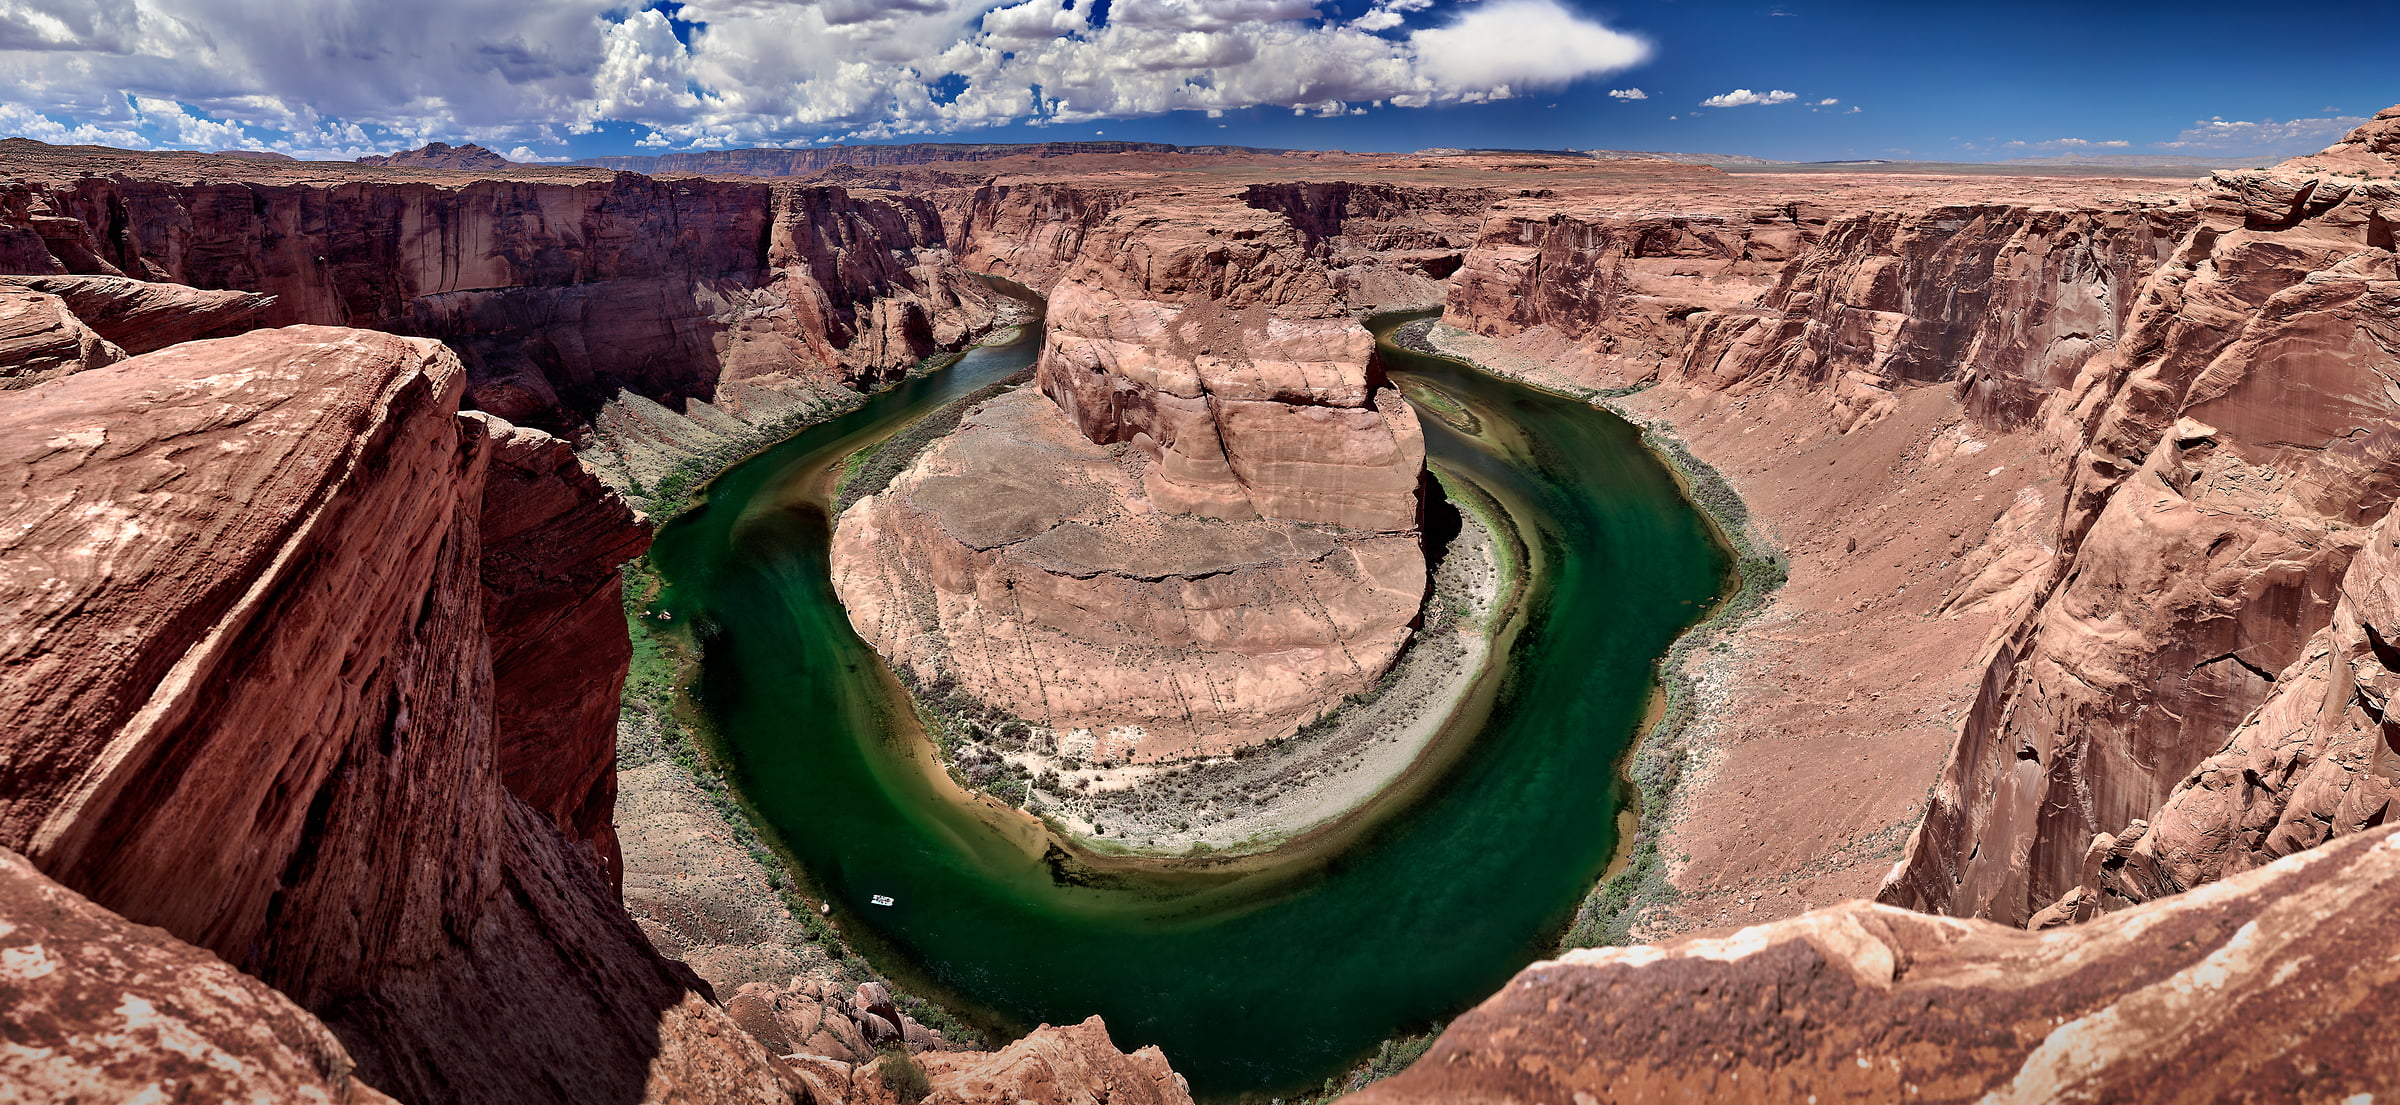 514 megapixels! A very high resolution landscape photo of Horseshoe Bend, a canyon in the American west; VAST photo created by Phil Crawshay in Horseshoe Bend, Page, Arizona, USA